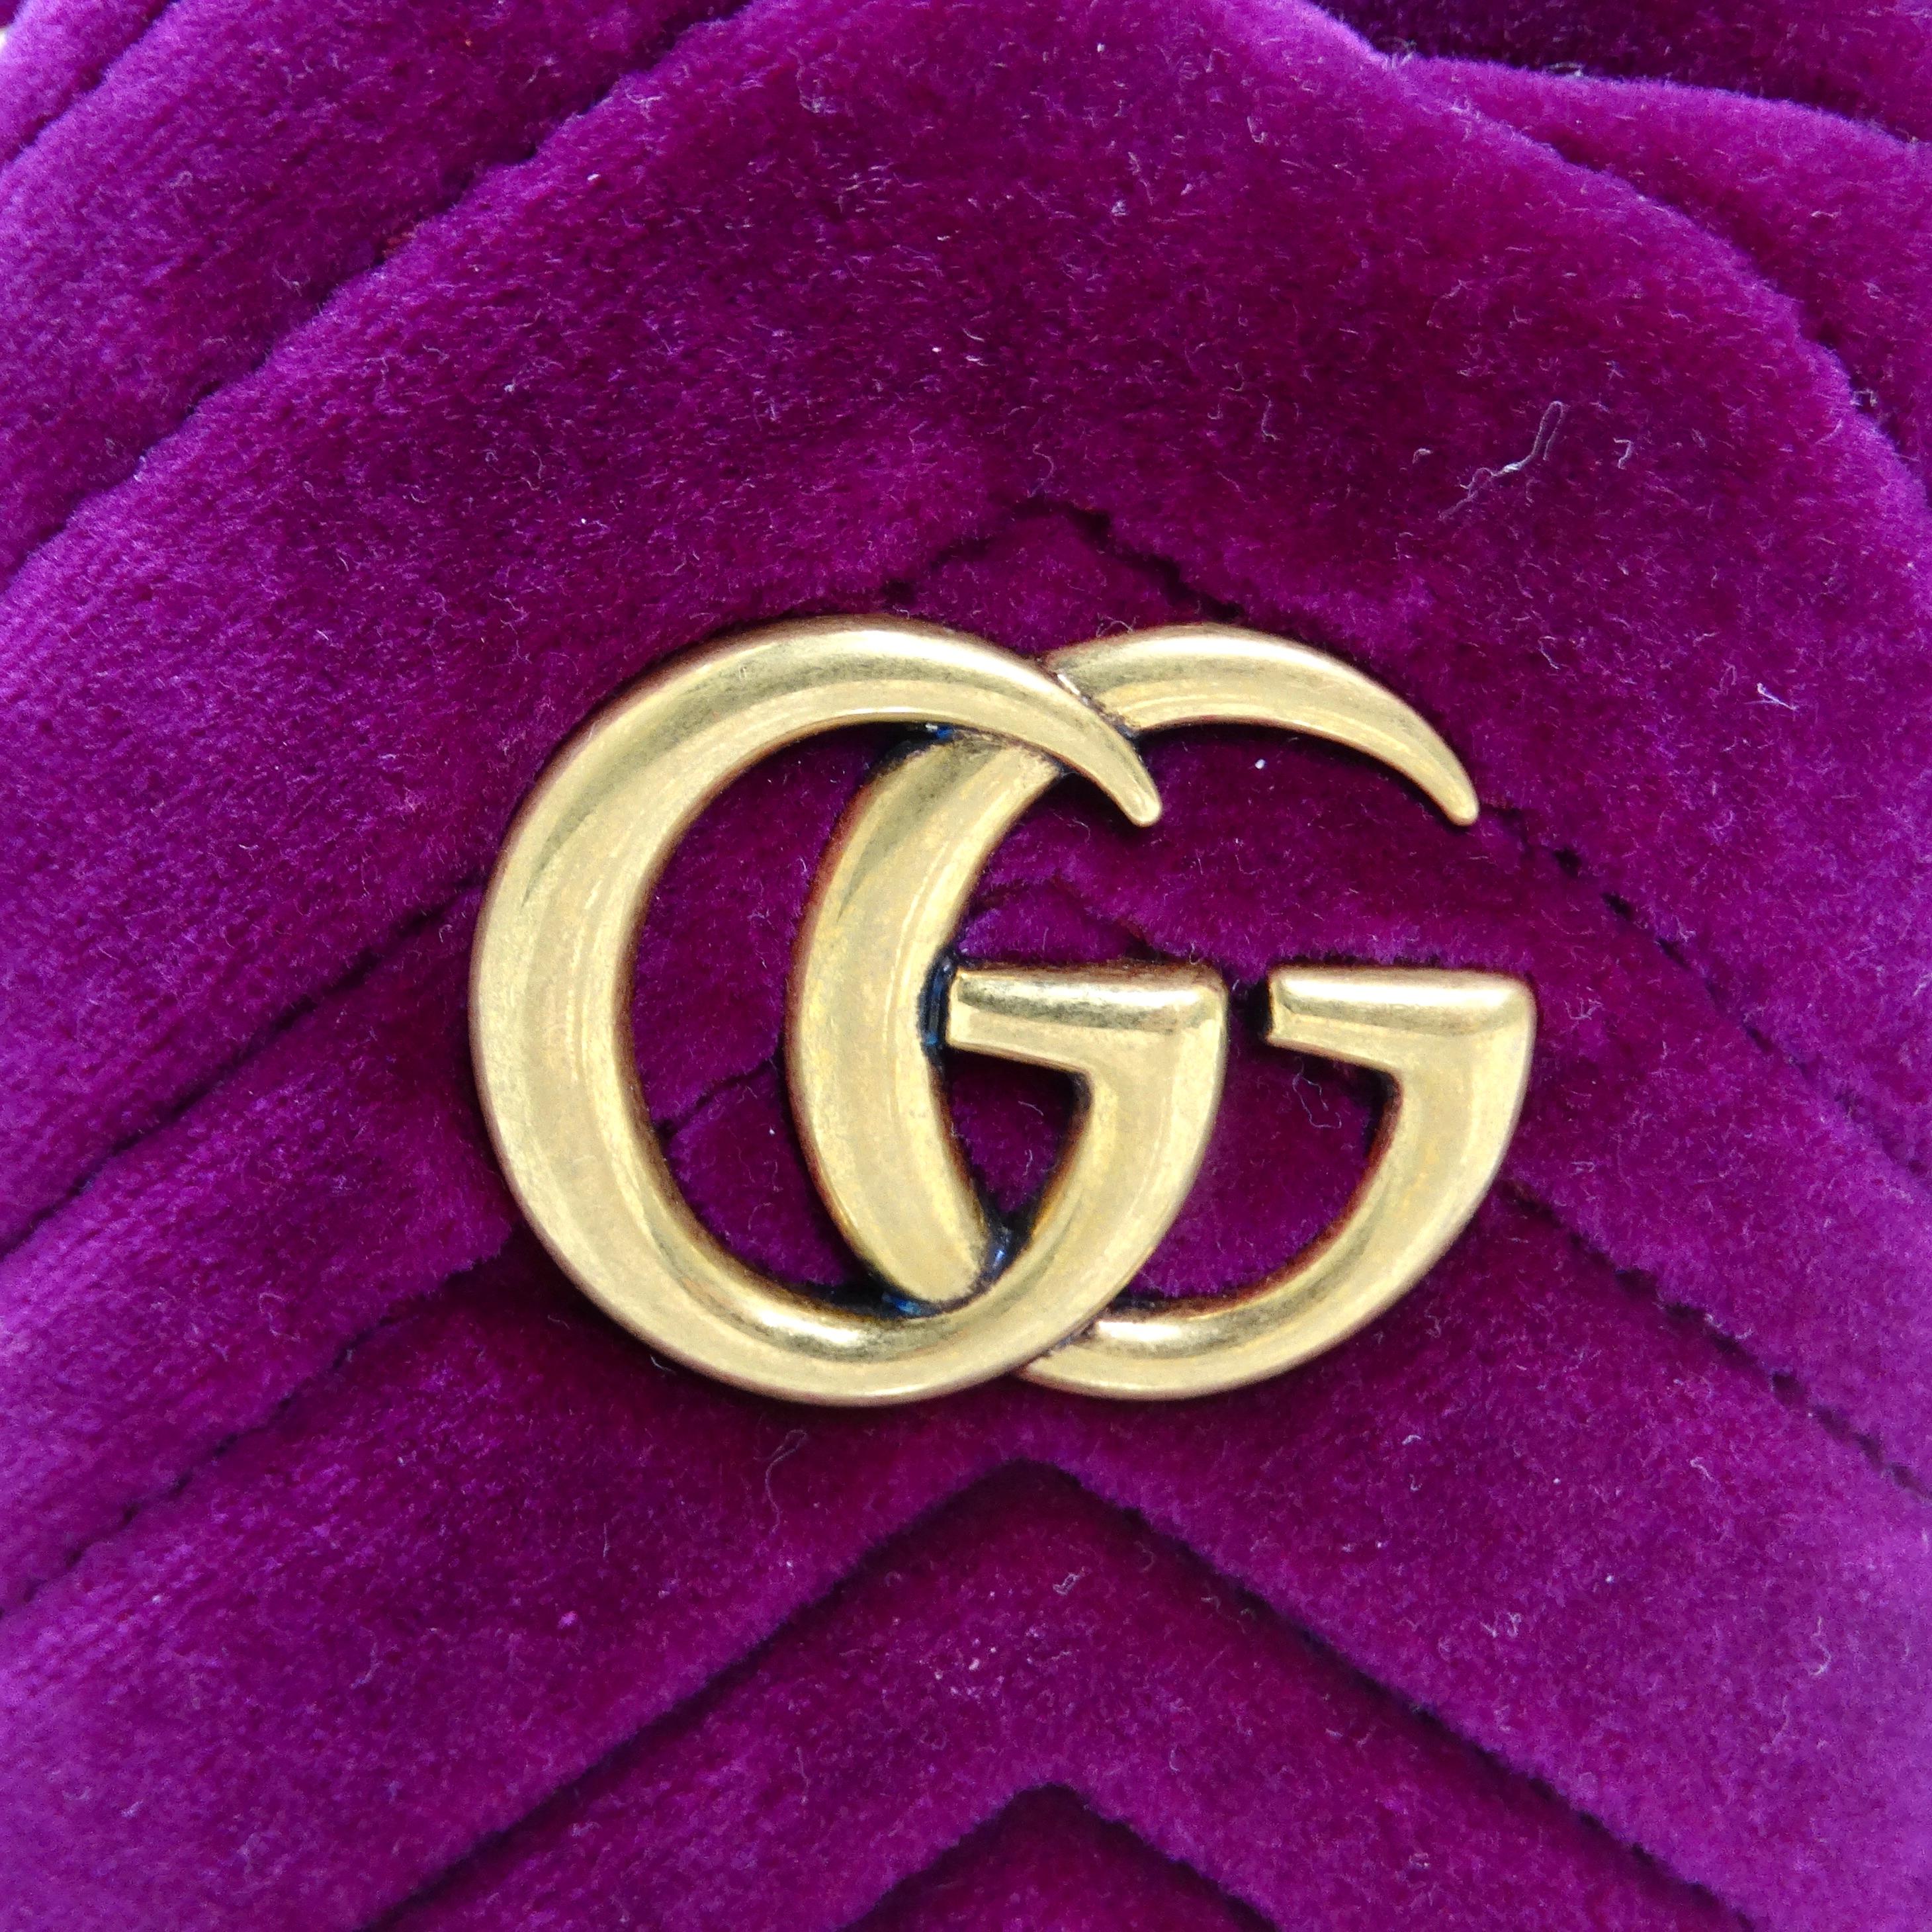 Introducing the Gucci GG Marmont Mini Velvet Bucket Bag – a luxurious and stylish accessory that exudes sophistication and elegance. Crafted from soft velvet in a rich raspberry purple hue, this shoulder bag is a statement piece that adds a pop of